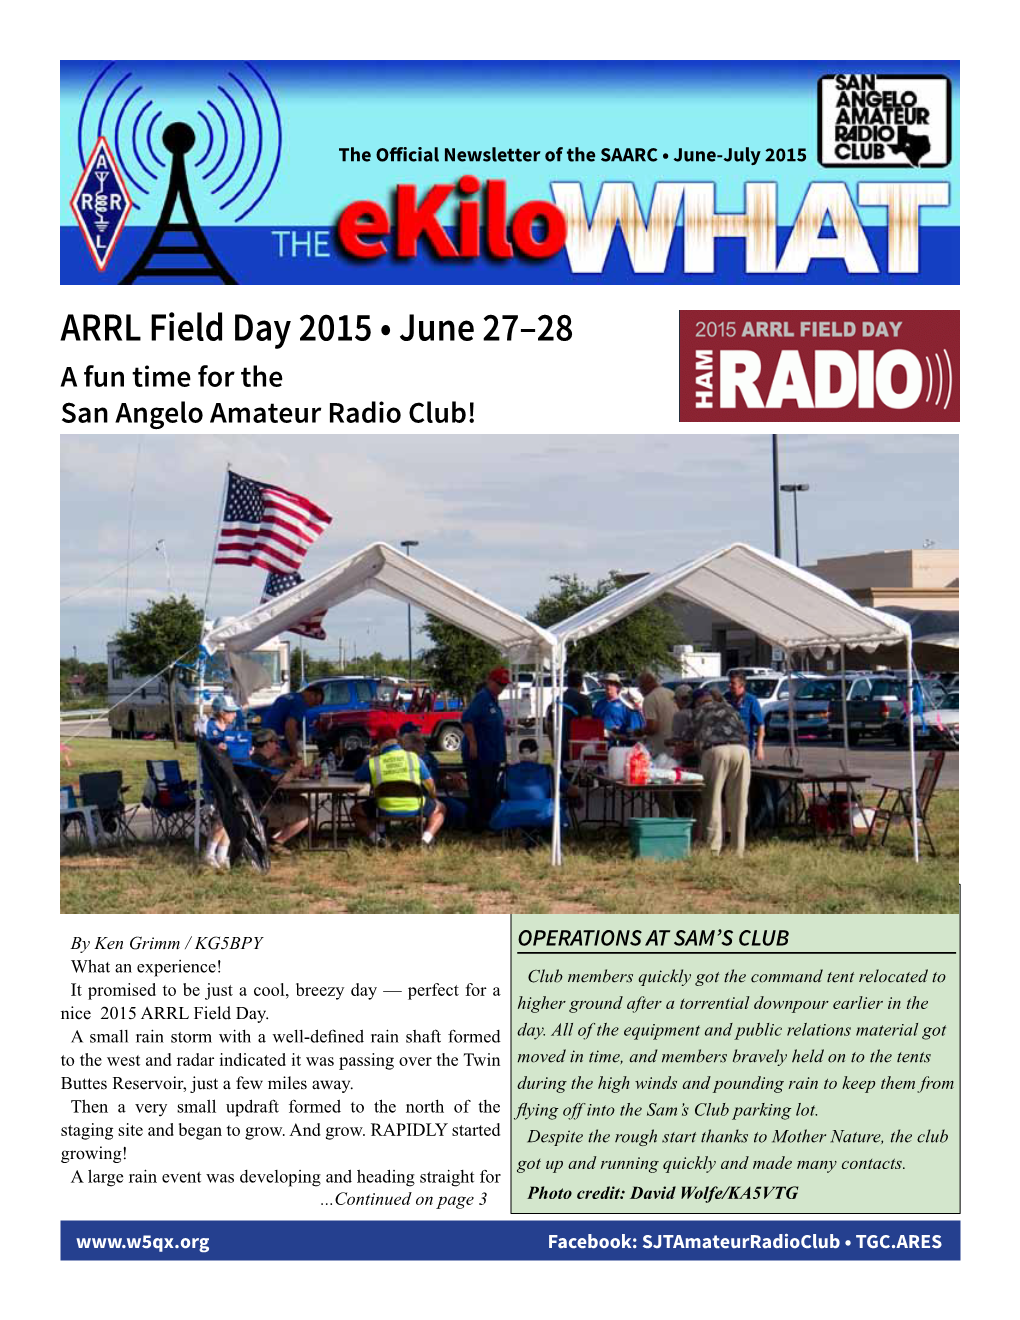 ARRL Field Day 2015 • June 27–28 a Fun Time for the San Angelo Amateur Radio Club!